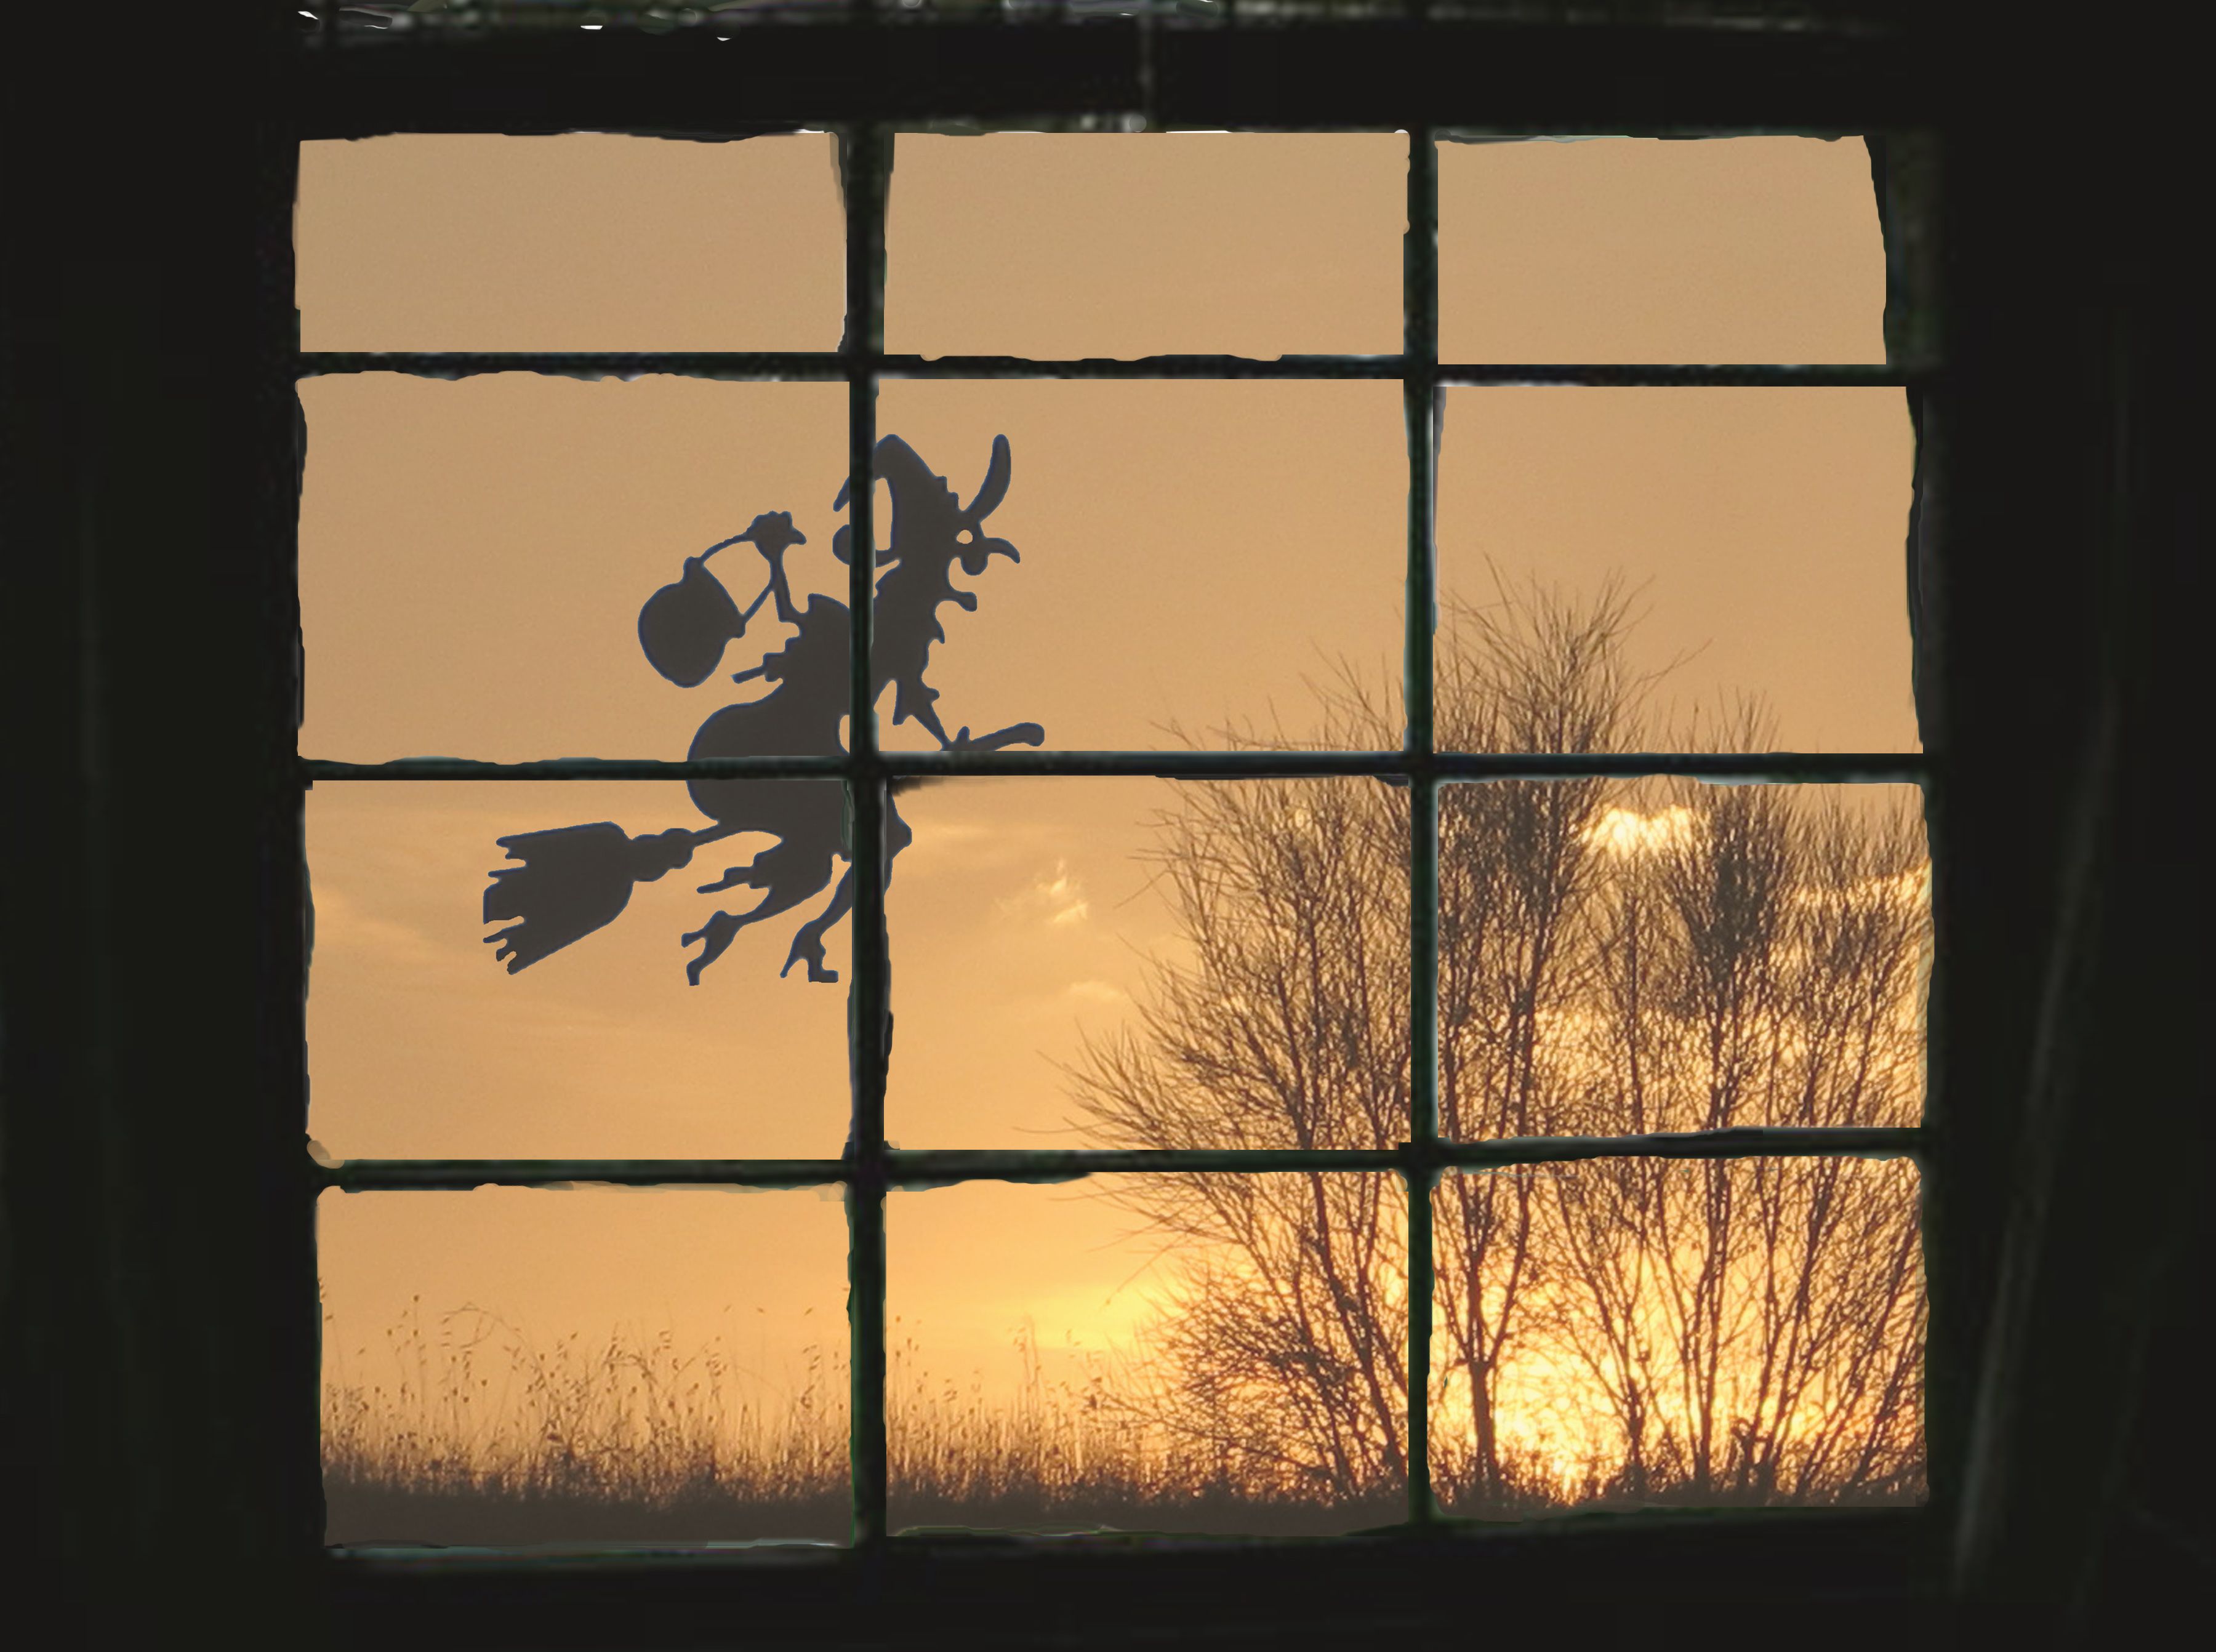 Wallpaper, window, shadow, sunlight, sky, picture frame, visual arts, silhouette, glass 3600x2684